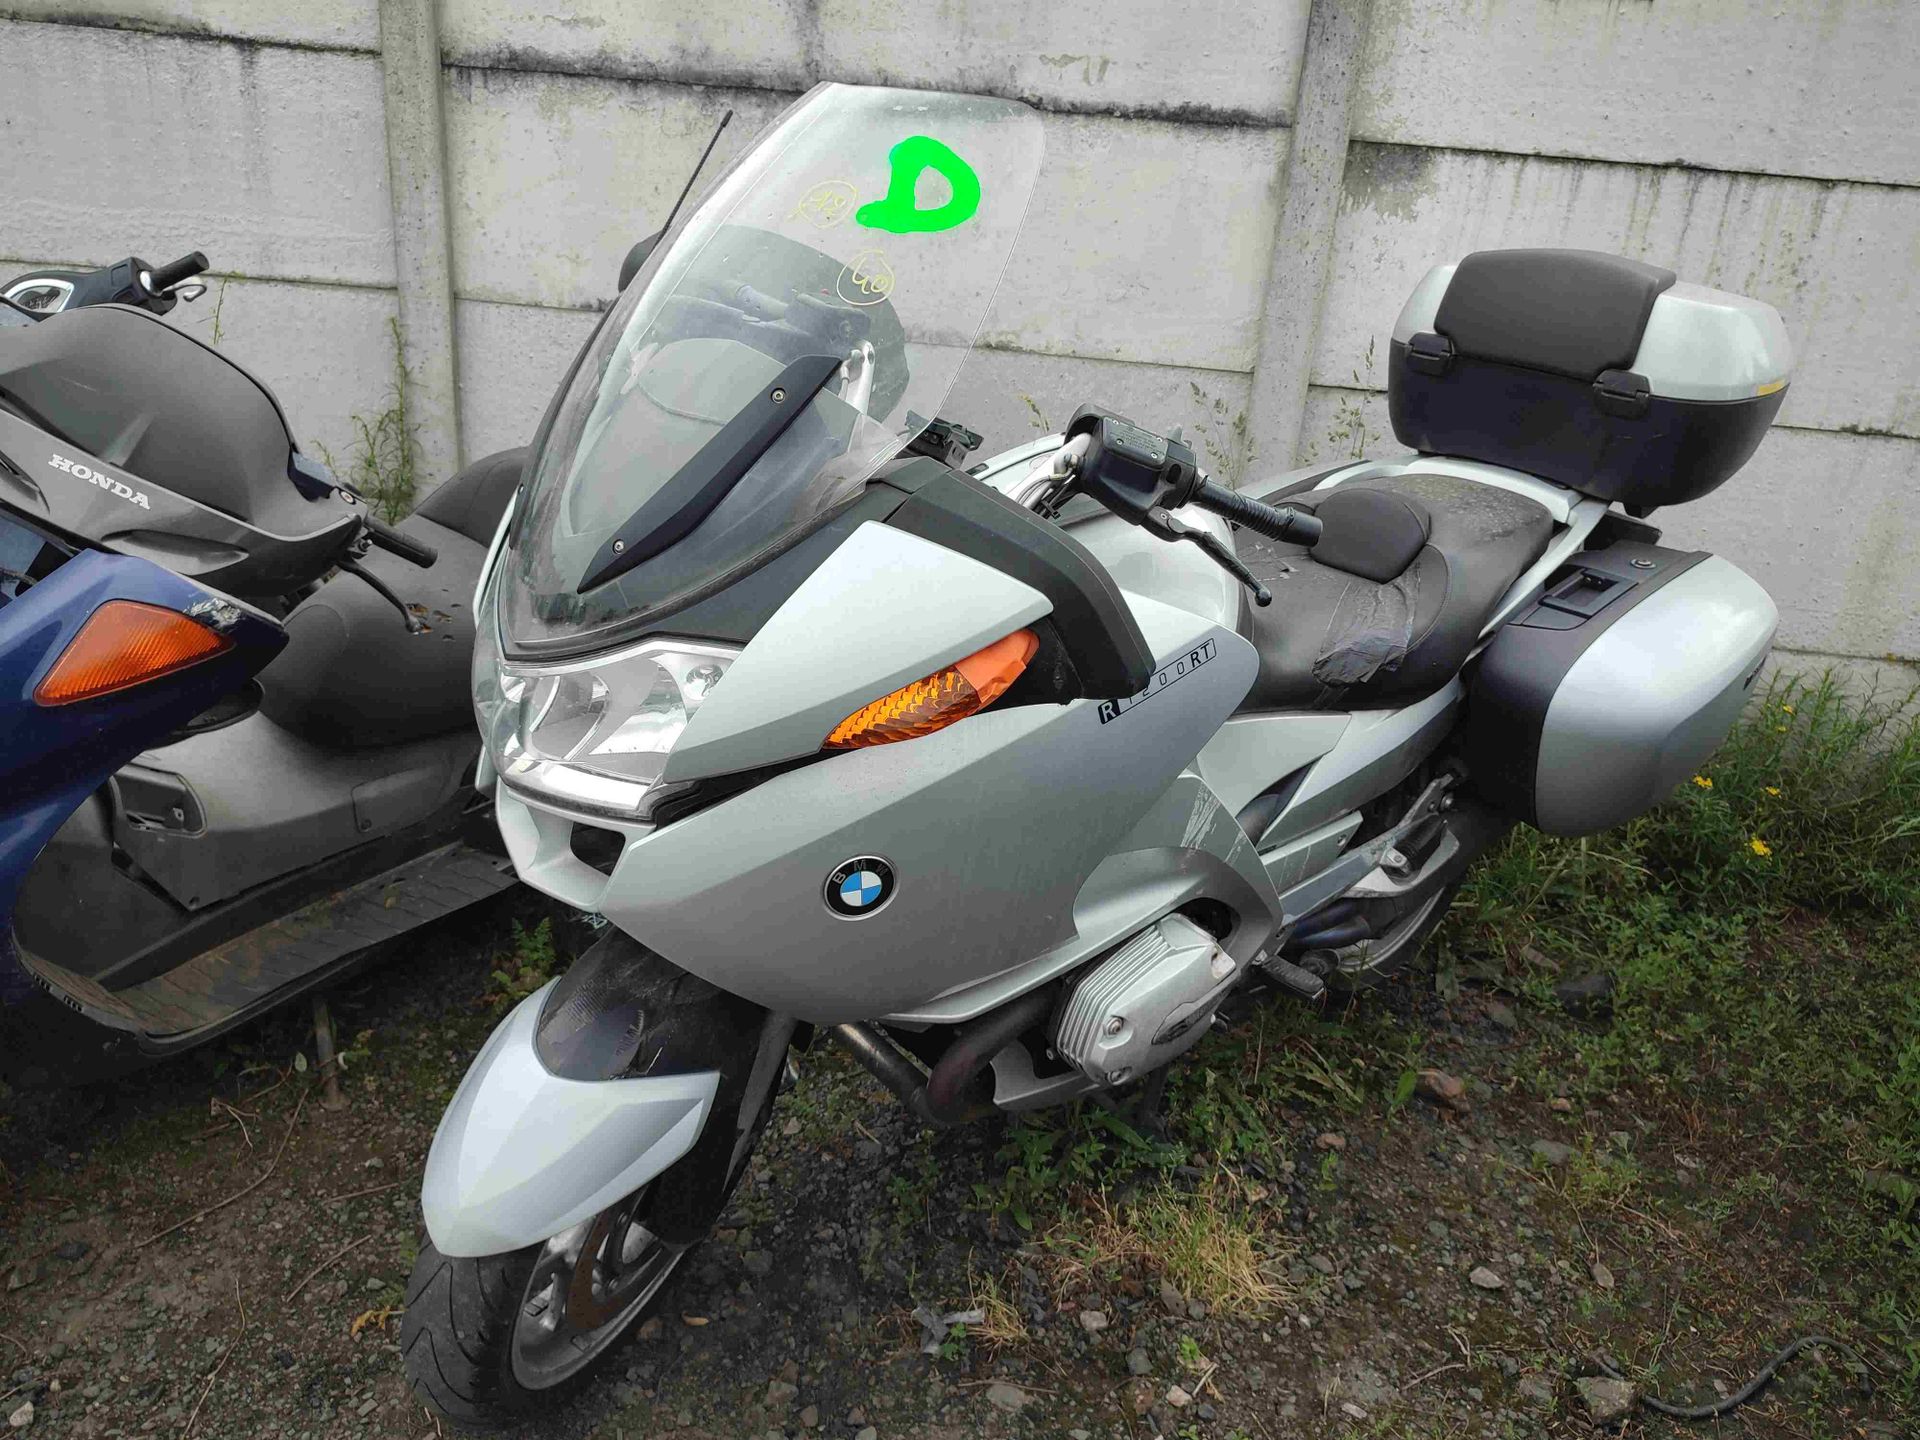 Null [RP][ACI] BMW R 1200 RT, Petrol, imm. BS-524-QR, Type unknown, serial numbe&hellip;